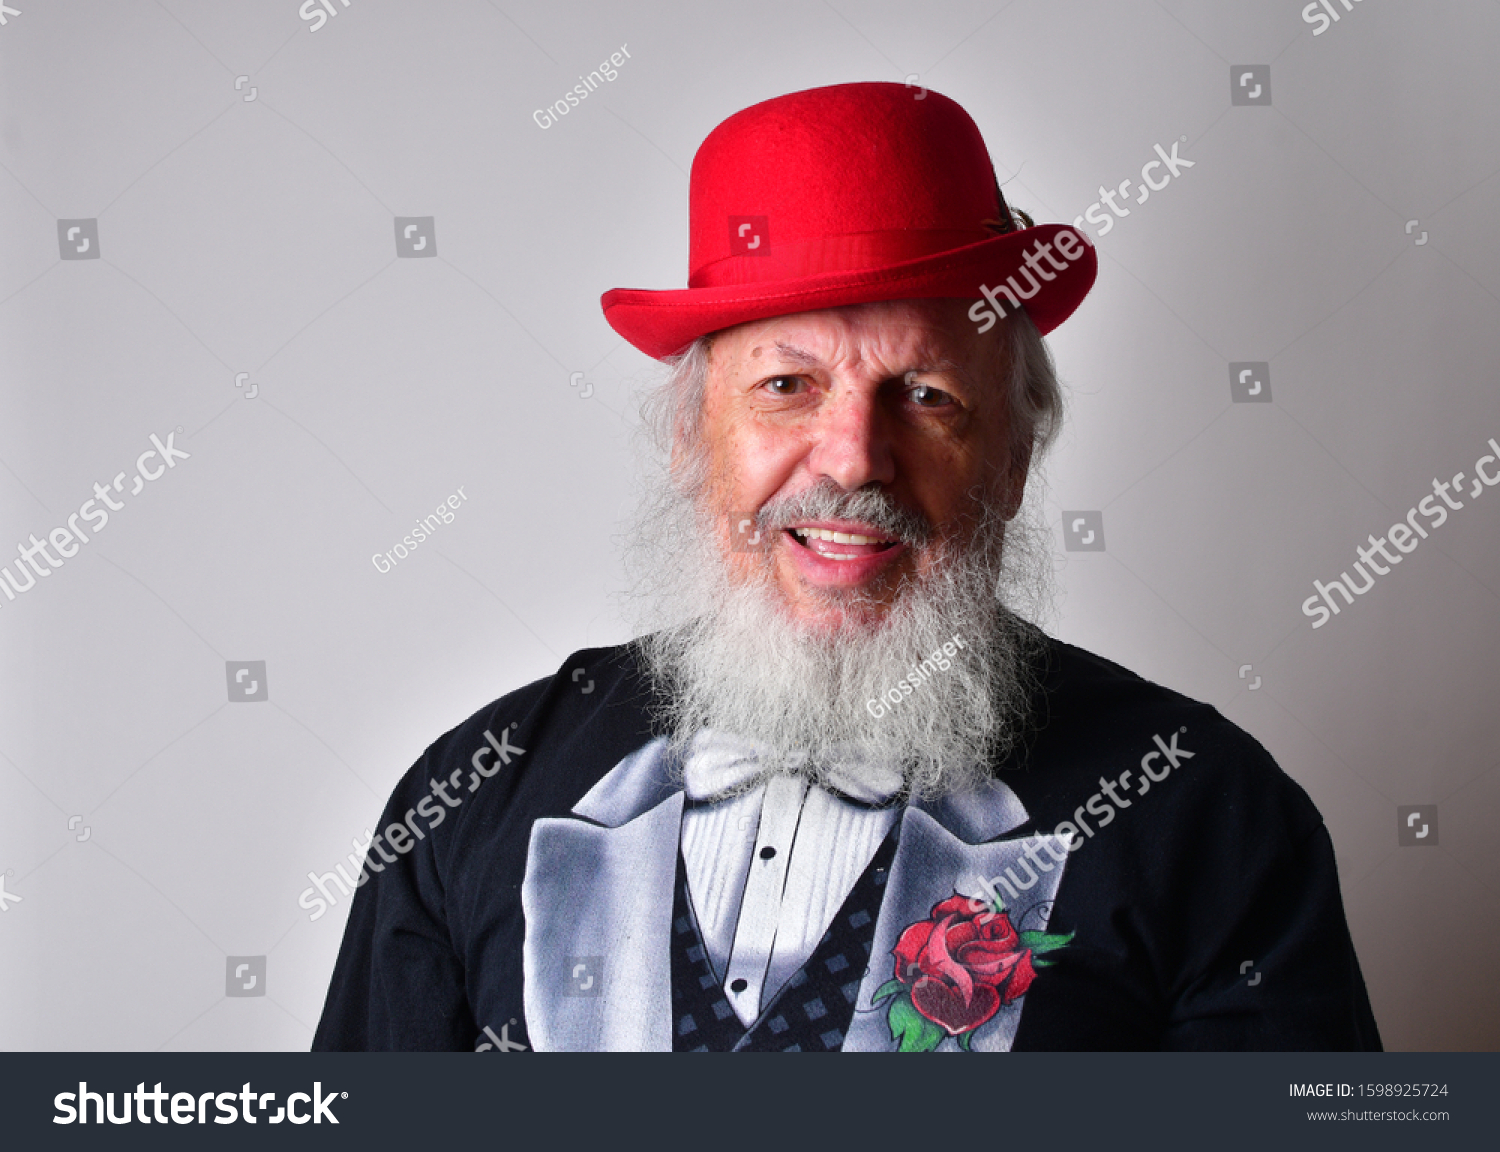 Happy old man in a fake tuxedo wearing a red bowler hat and making facial expressions.
Old Caucasian with a long white beard, faux tuxedo and red bowler hat making  faces. #1598925724